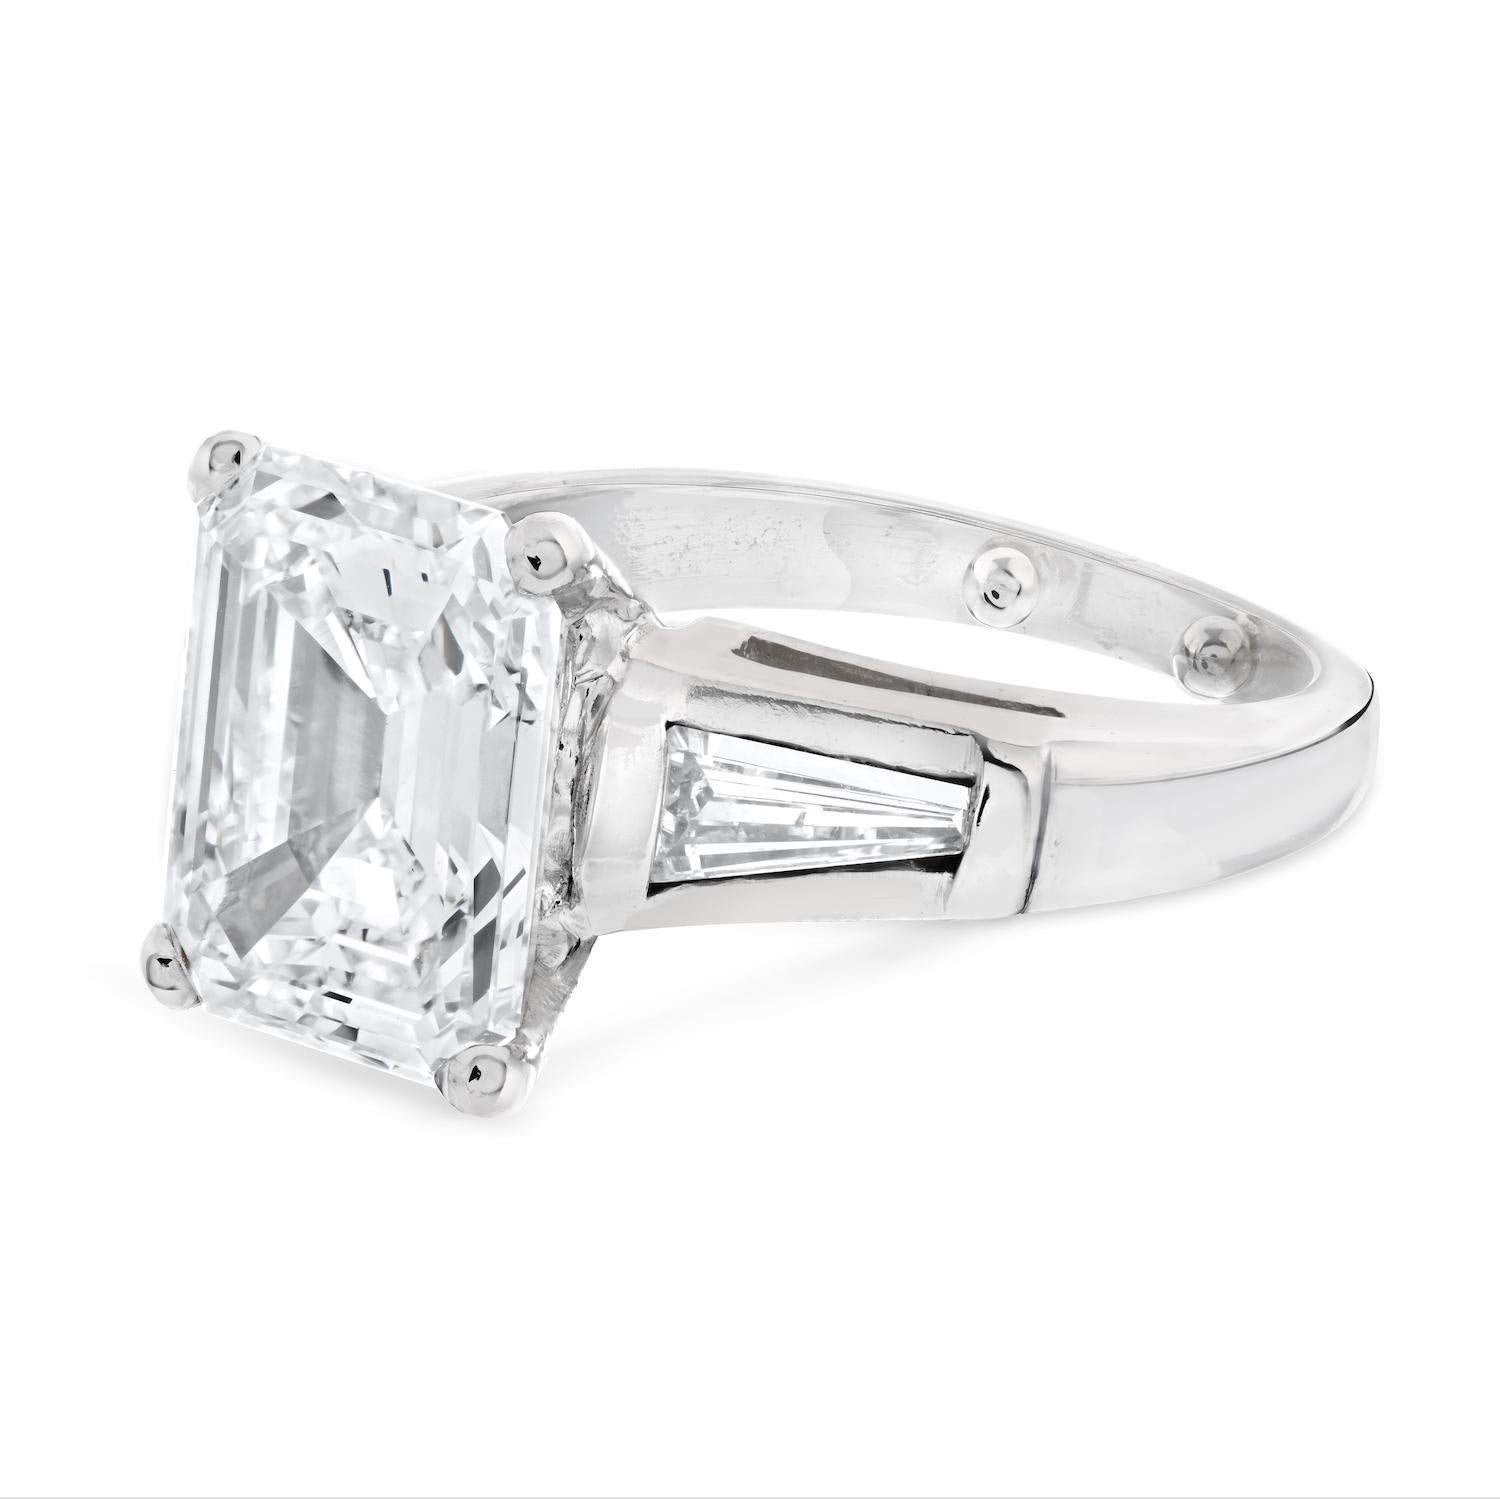 emerald cut diamond ring with baguette side stones